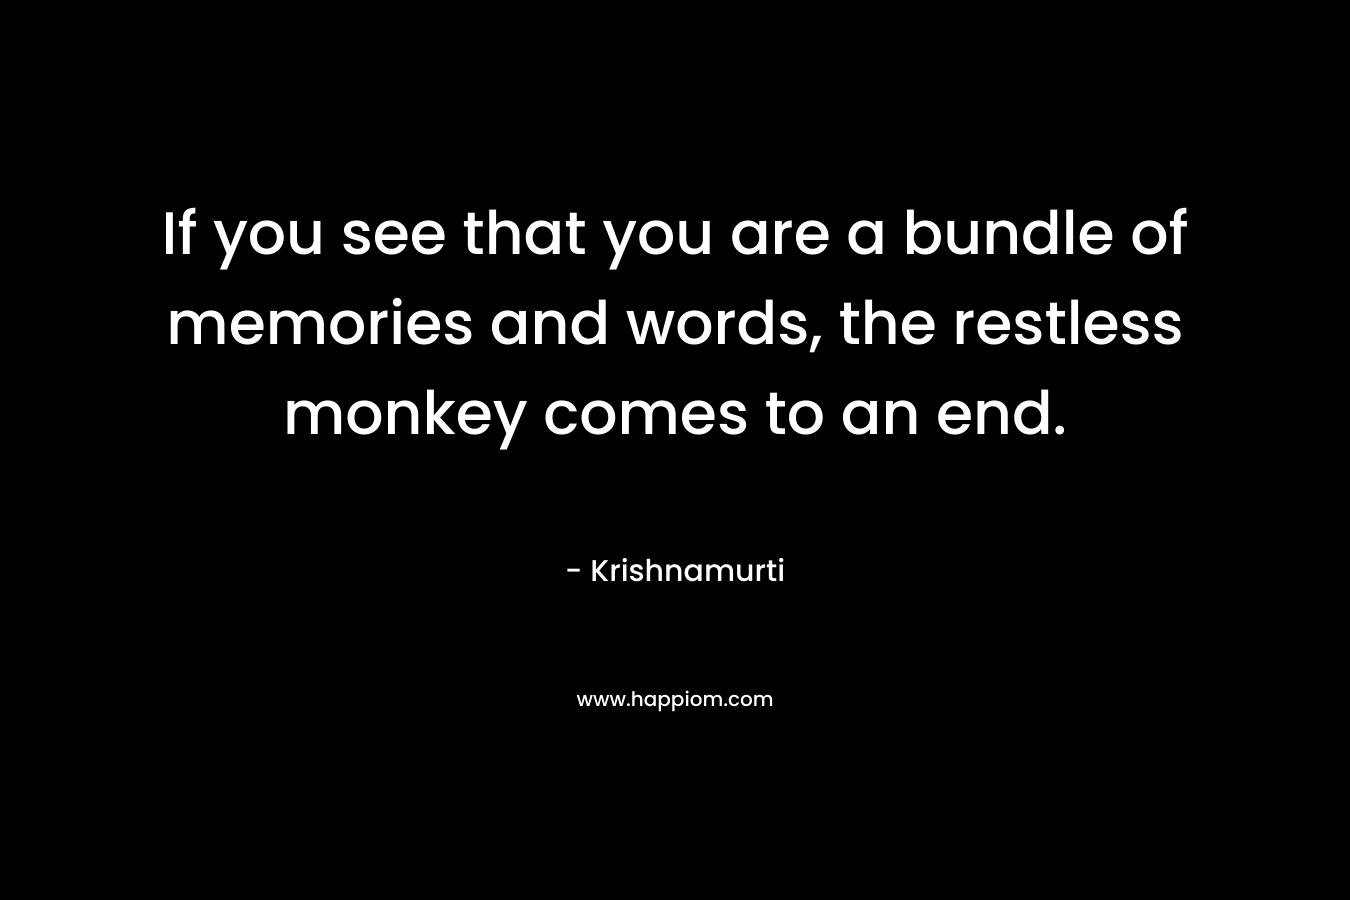 If you see that you are a bundle of memories and words, the restless monkey comes to an end.